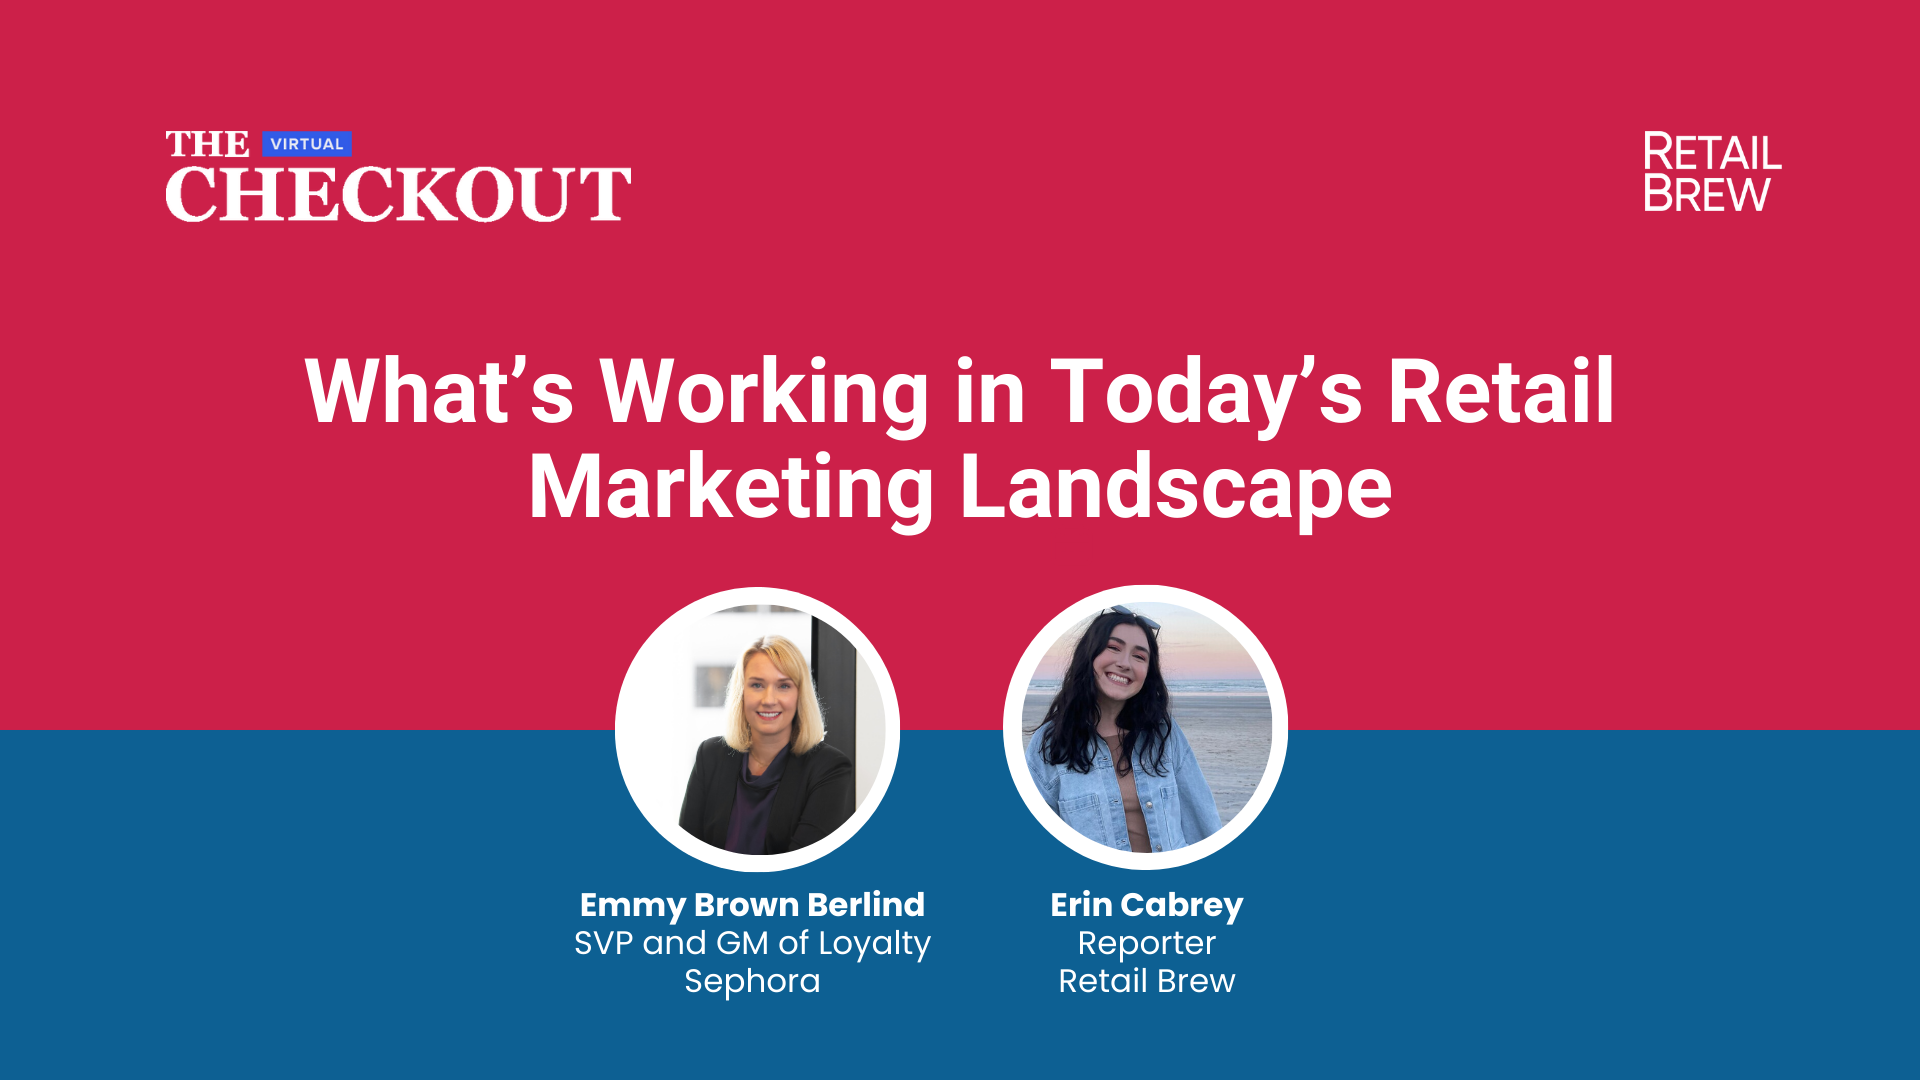 The Virtual Checkout Retail Brew event logo above "What's Working in Today's Retail Marketing Landscape" text and two presenter headshots